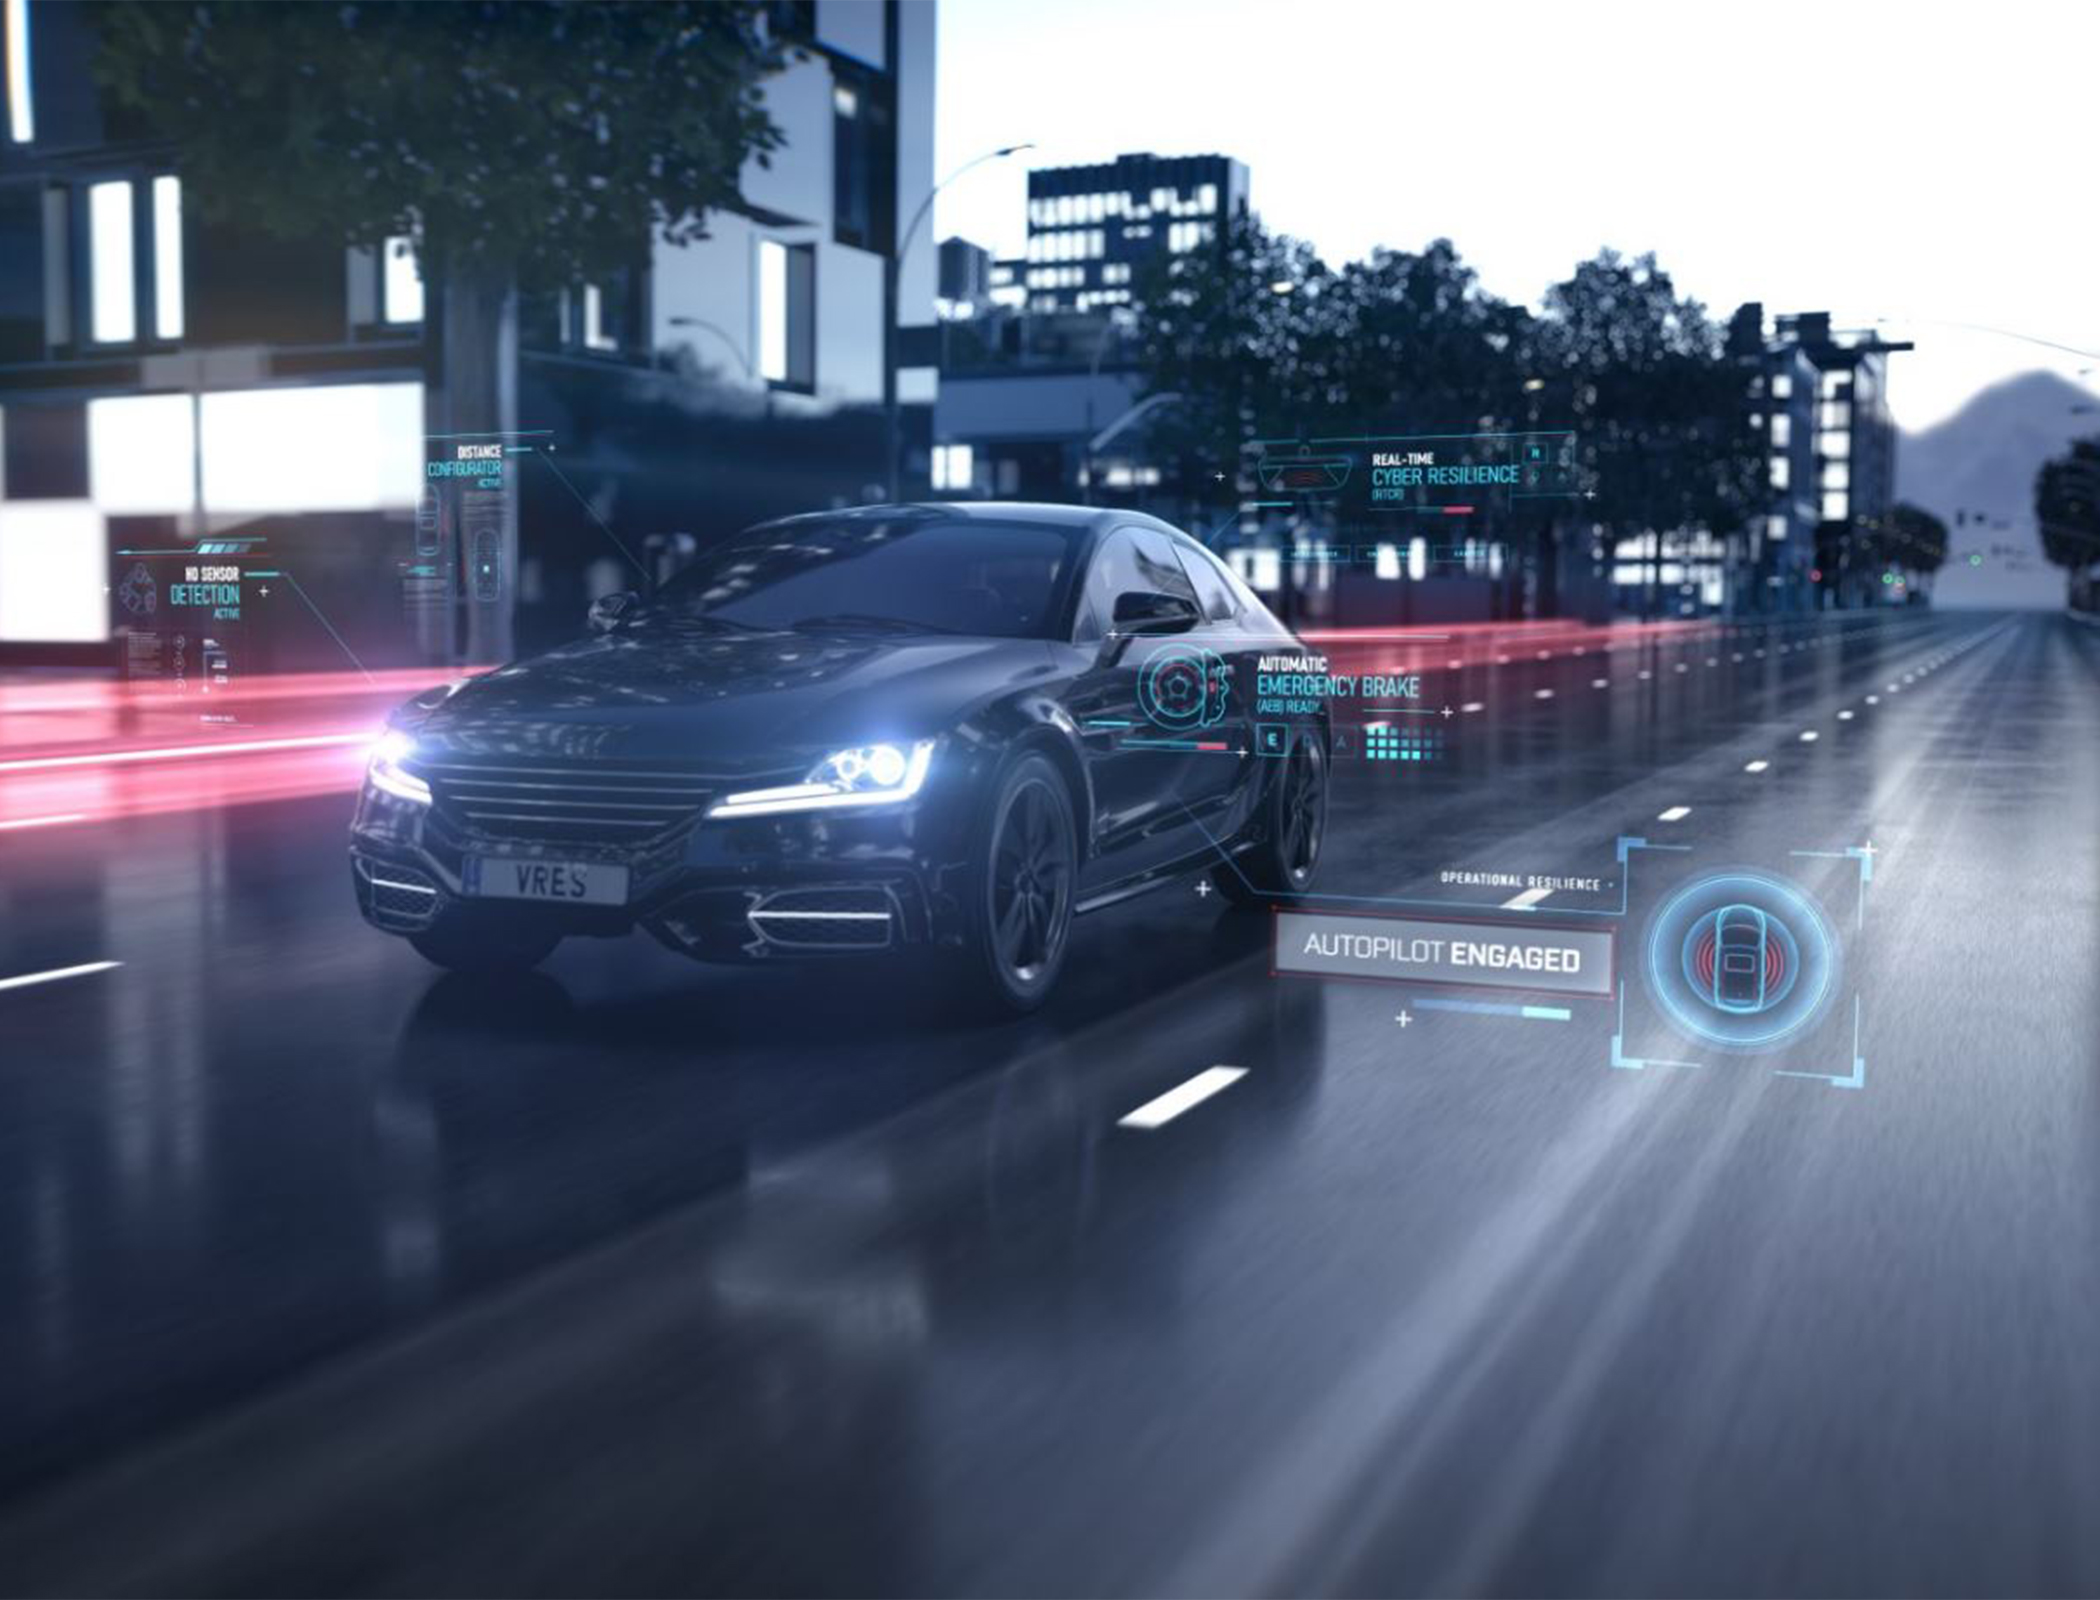 UK urged to roll out automated vehicle rules or risk losing £66bn economic uplift